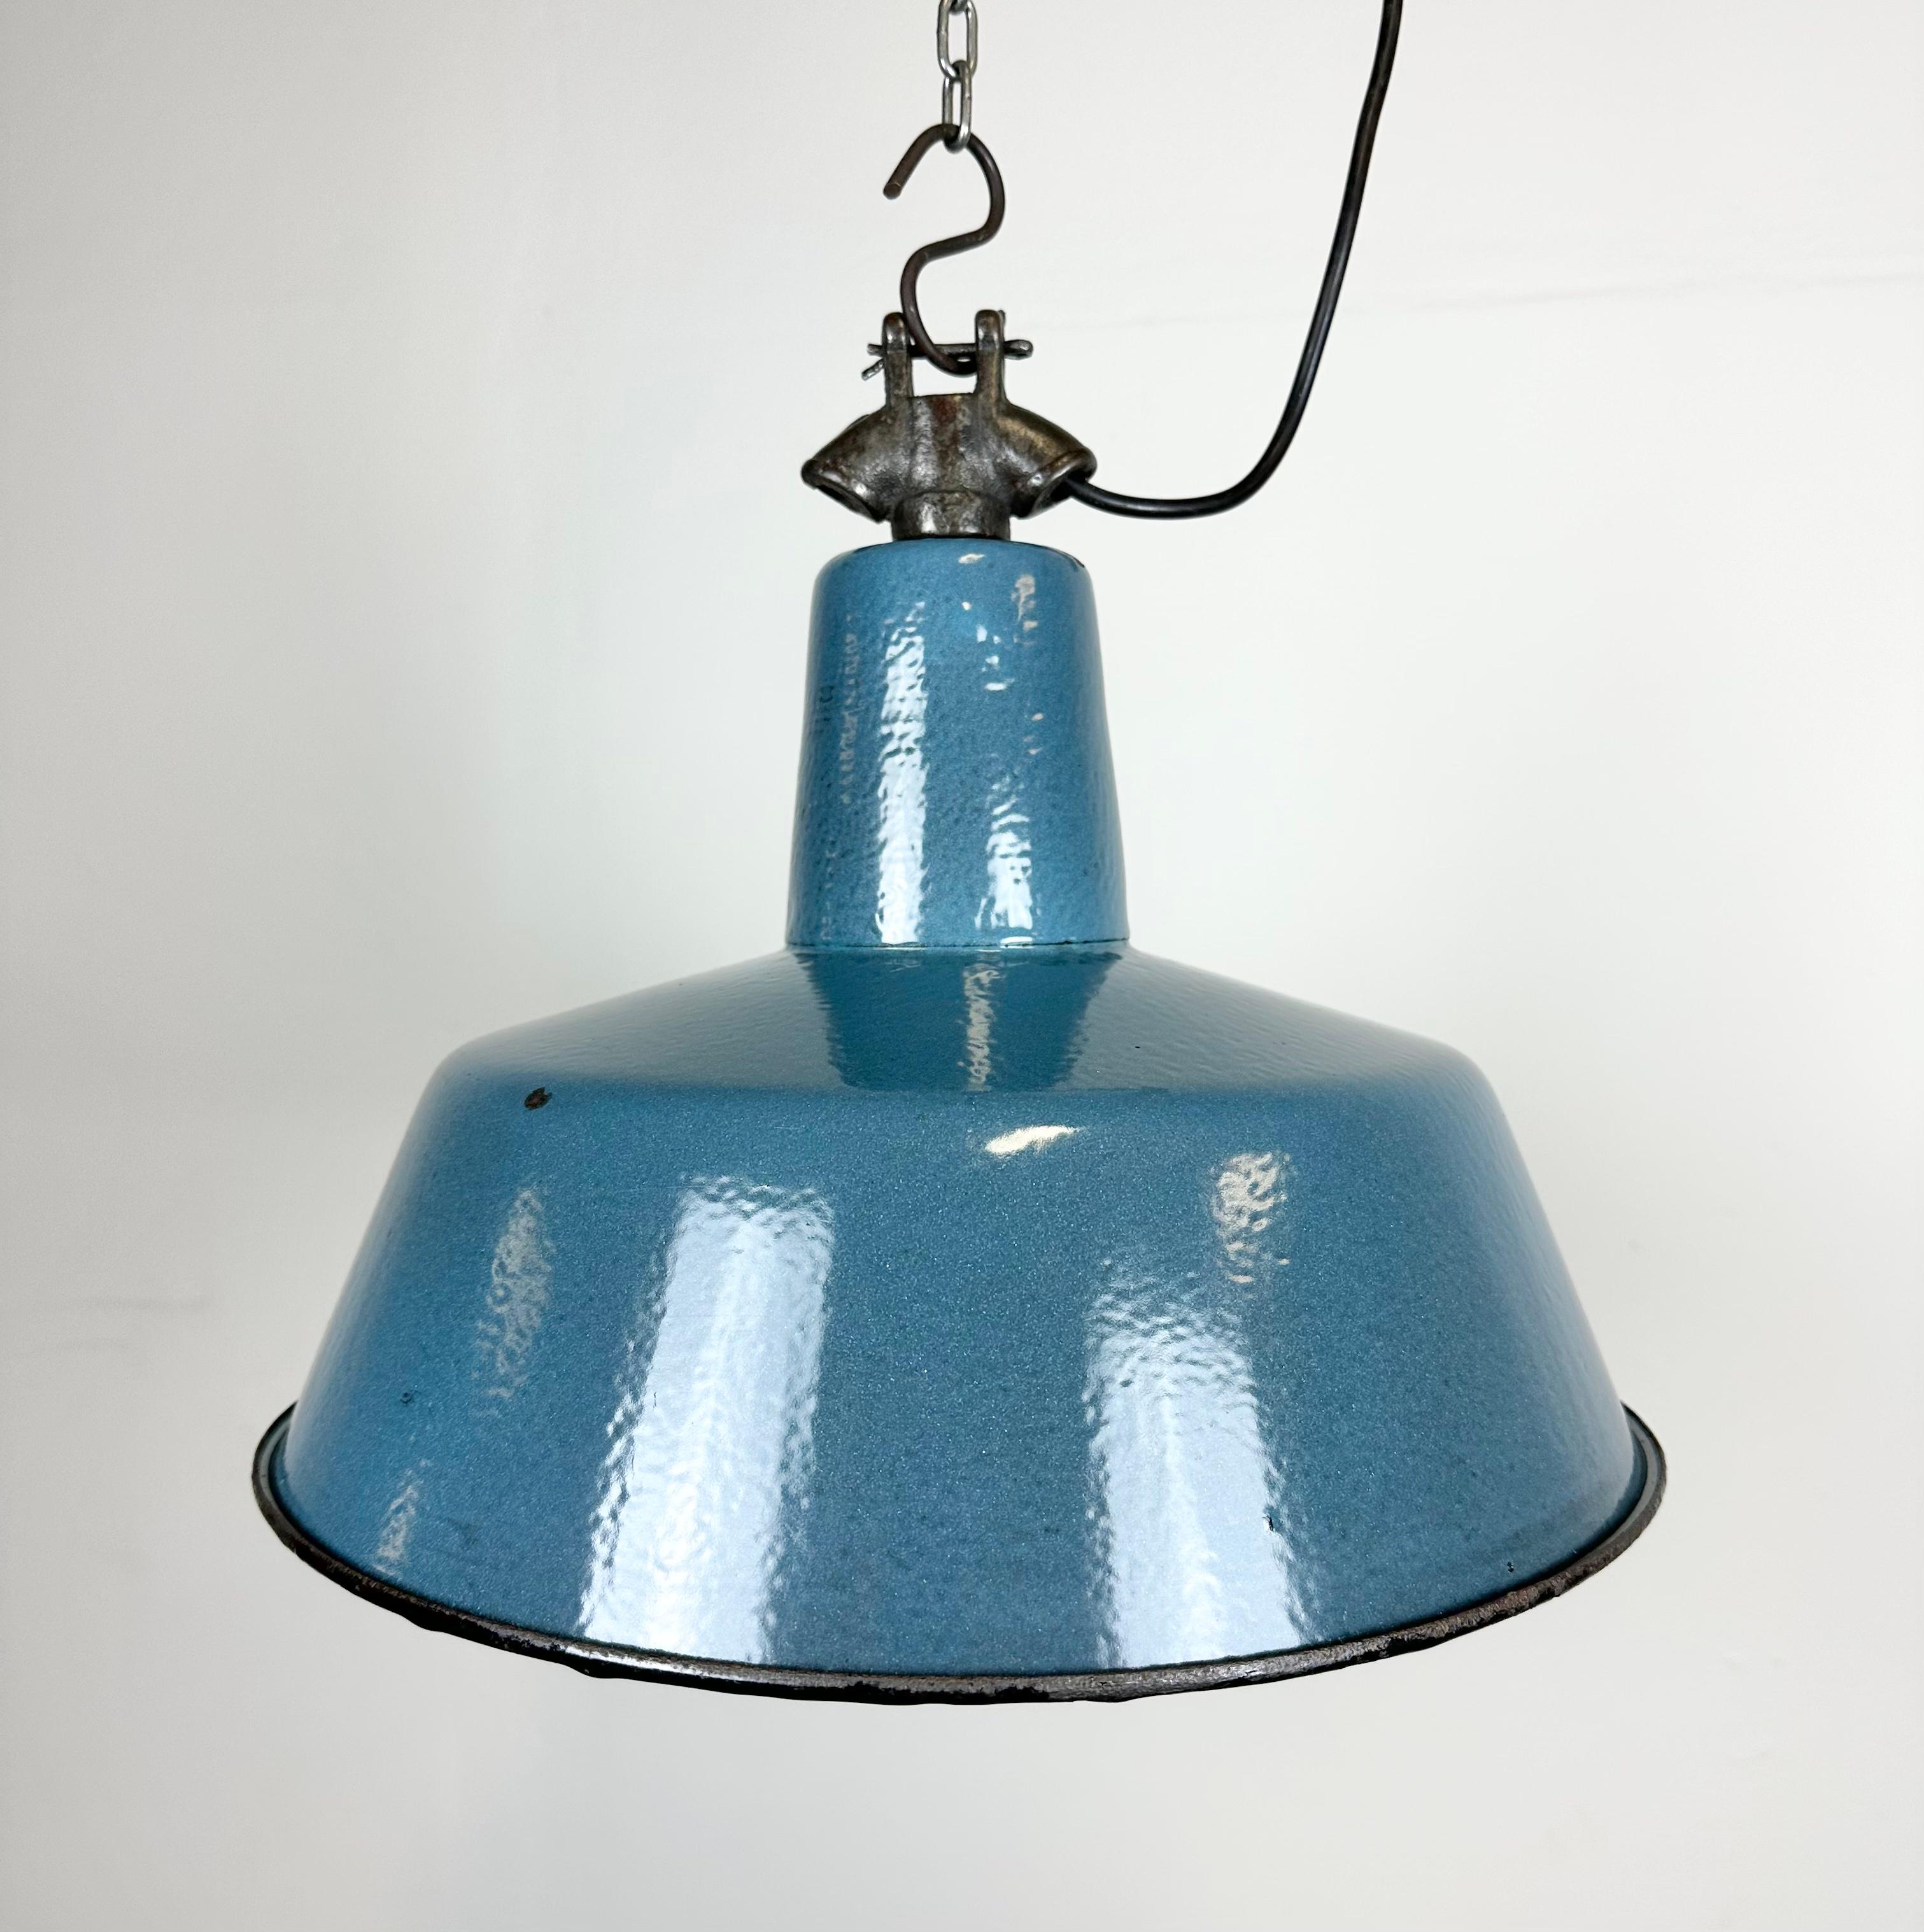 Polish Industrial Blue Enamel Factory Lamp with Cast Iron Top, 1960s For Sale